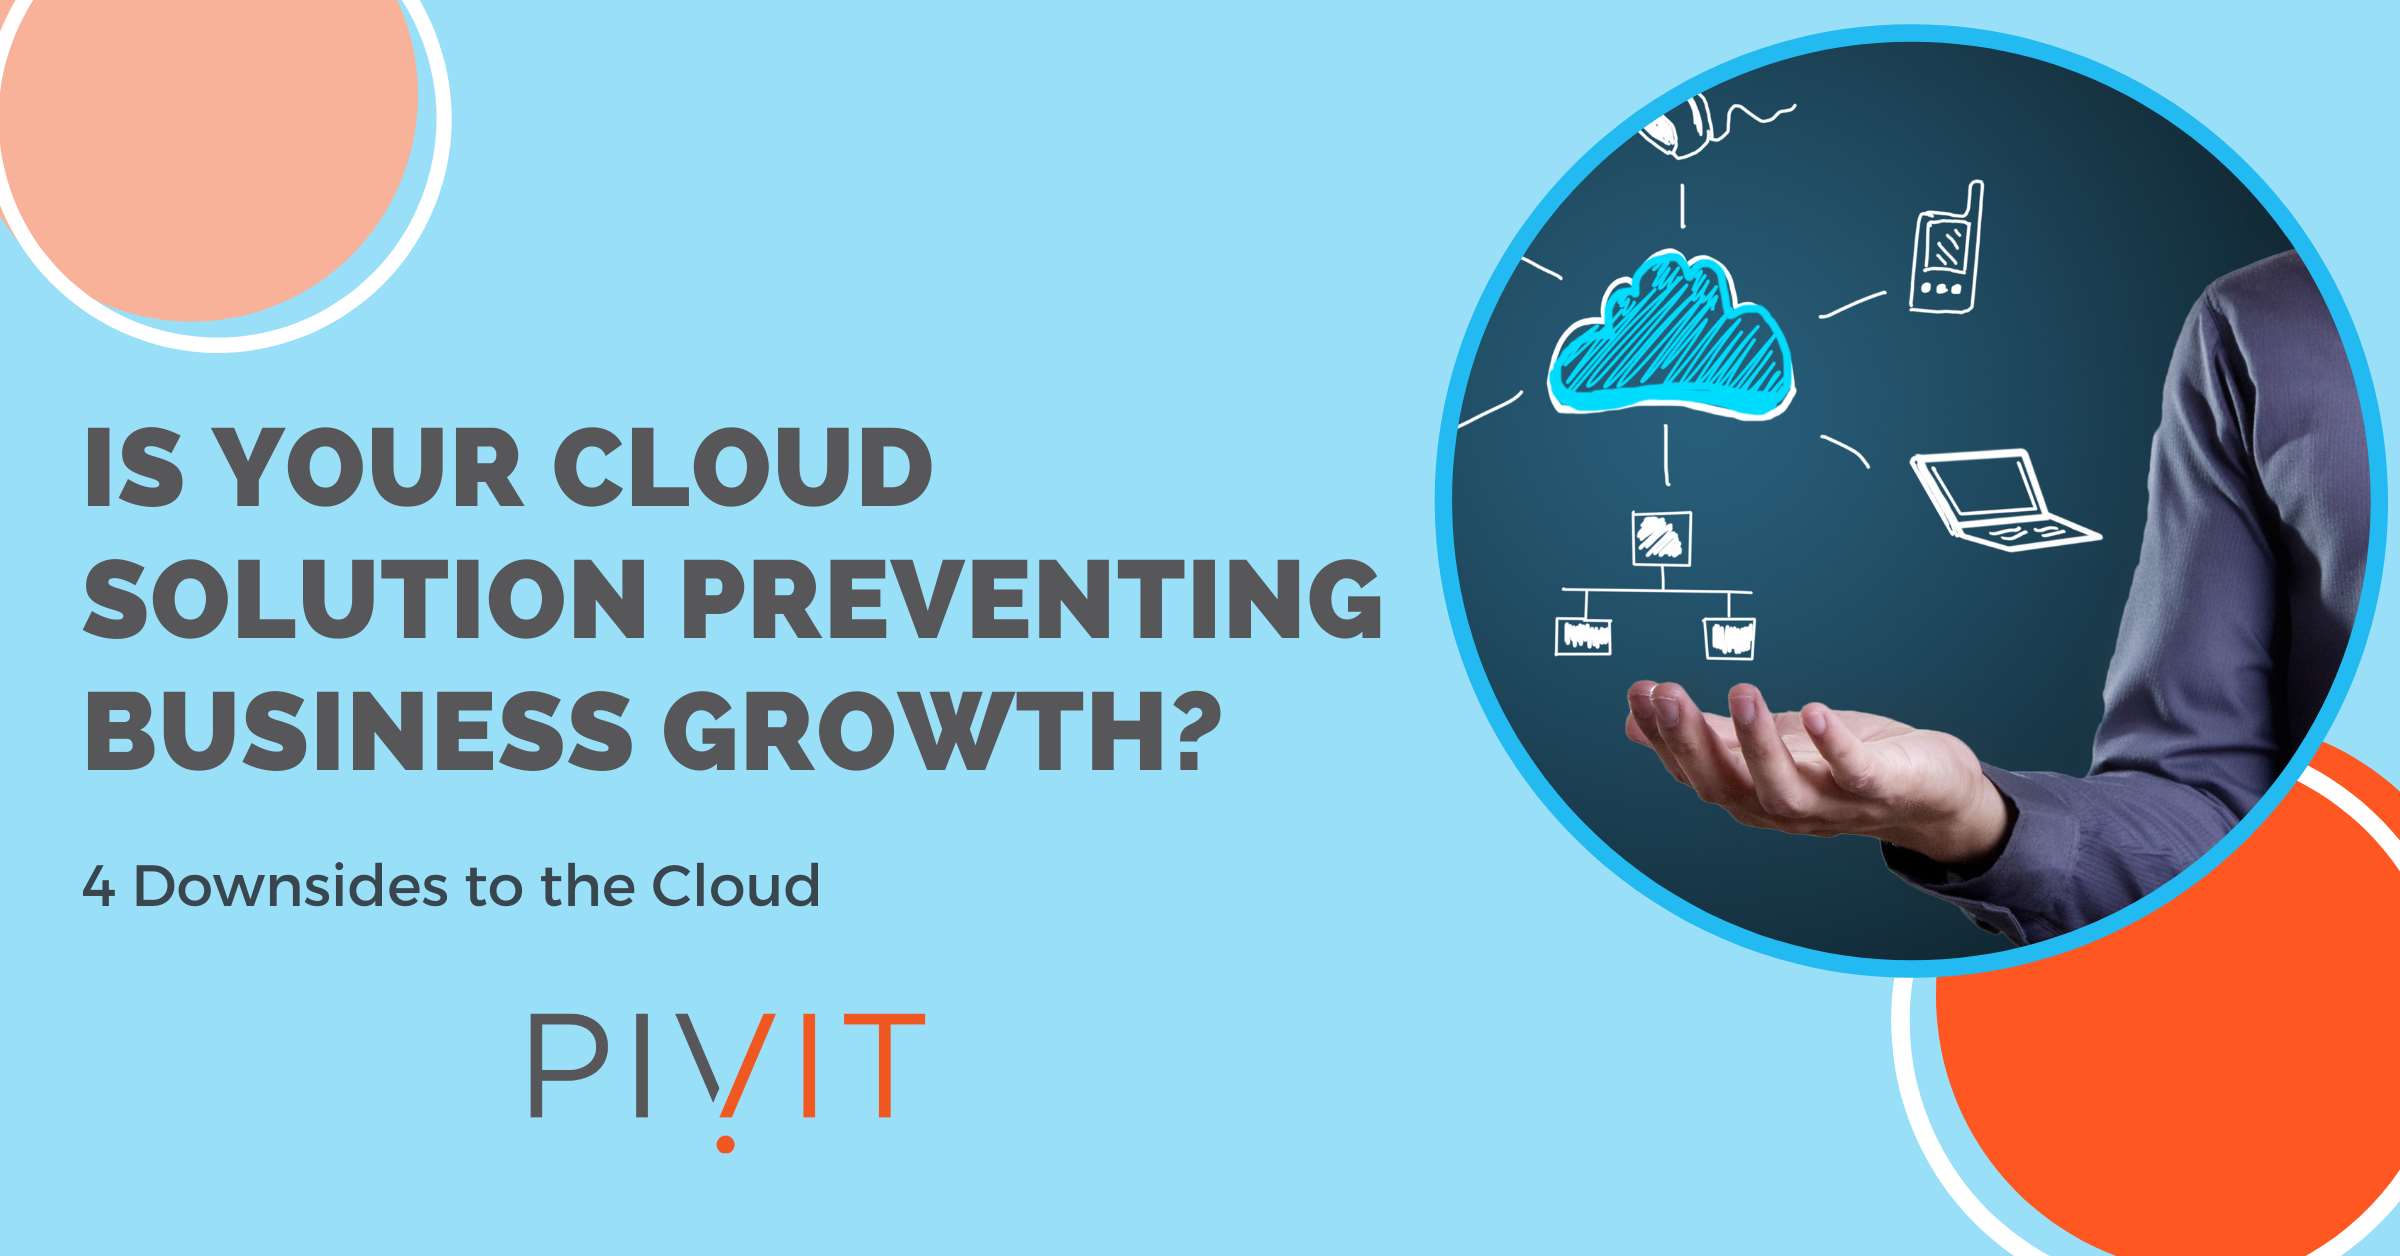 cloud solutions and business growth from pivit global